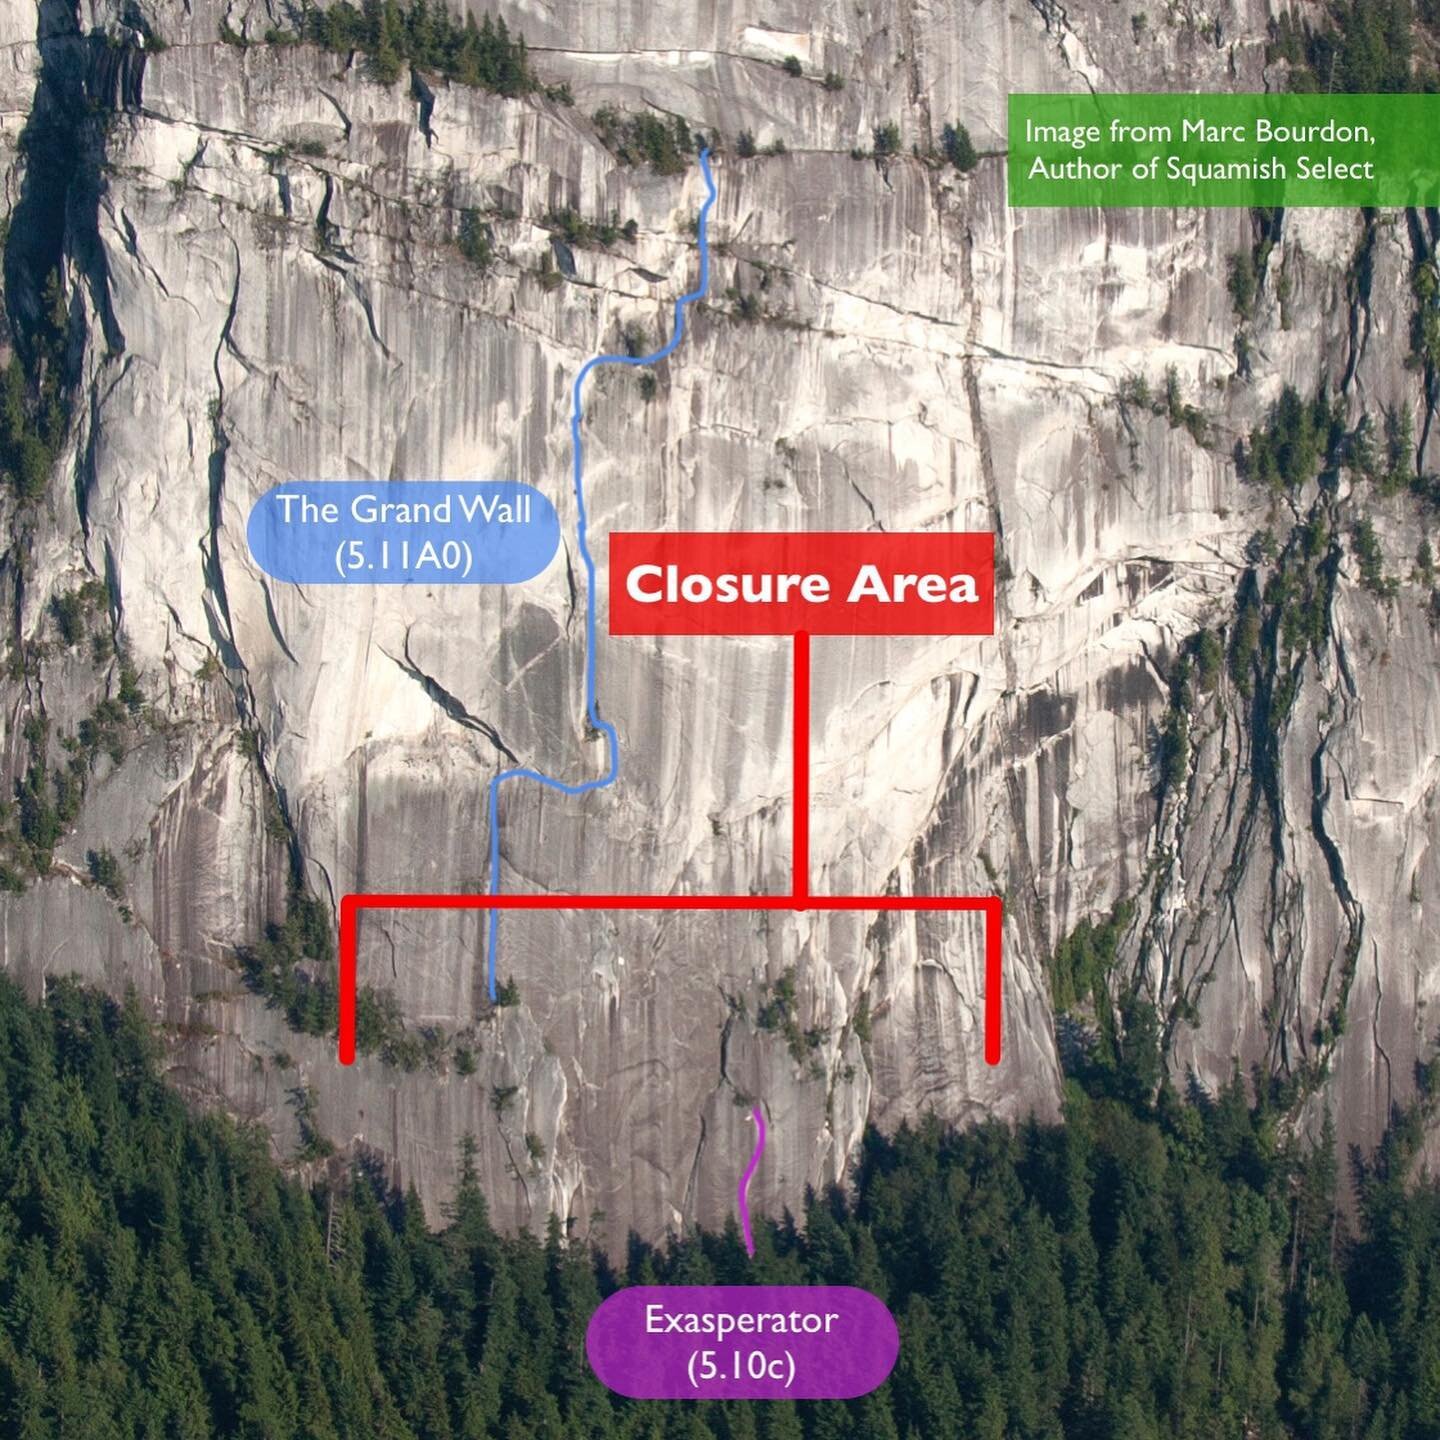 Update on Grand Wall closure:
The rockfall closure for the Grand Wall remains in place, with a couple of changes. After further rockfall near the Black Dyke, the boundary has been expanded on the right side to cover Java Jive and Flex Capacitor. The 